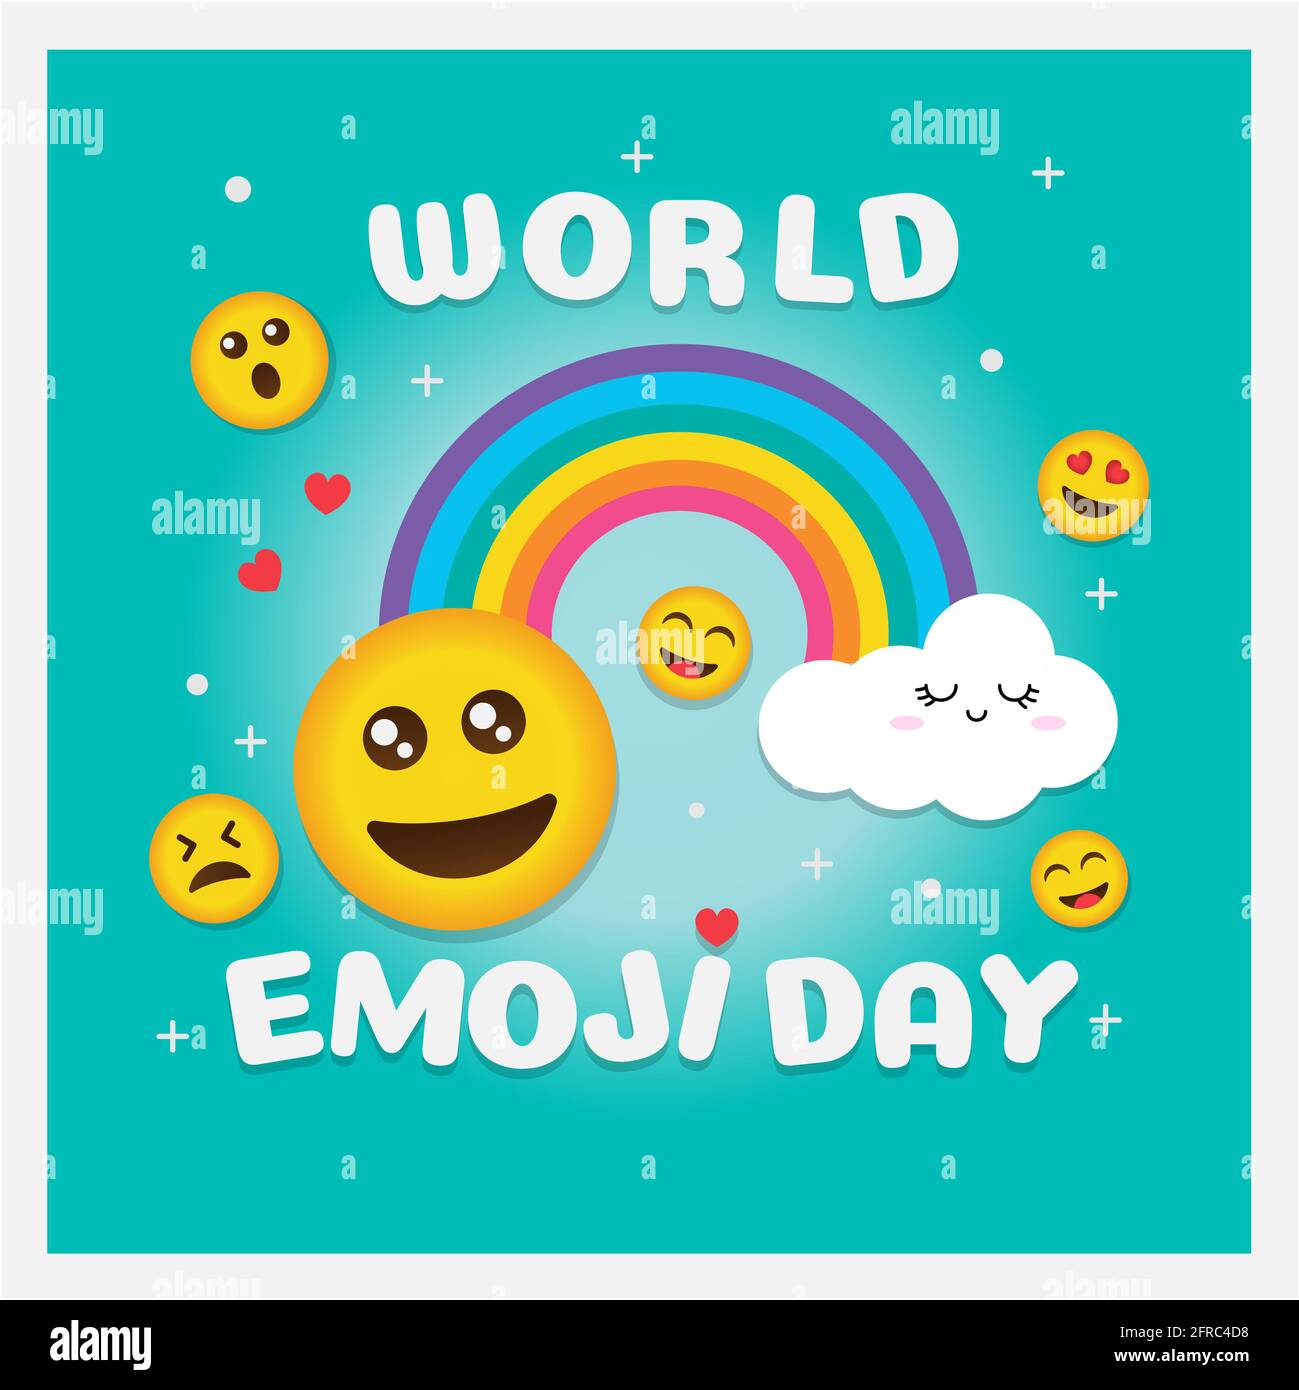 World emoji day greeting card and background template. Hand drawn. Flat design. Vector illustration. Stock Photo